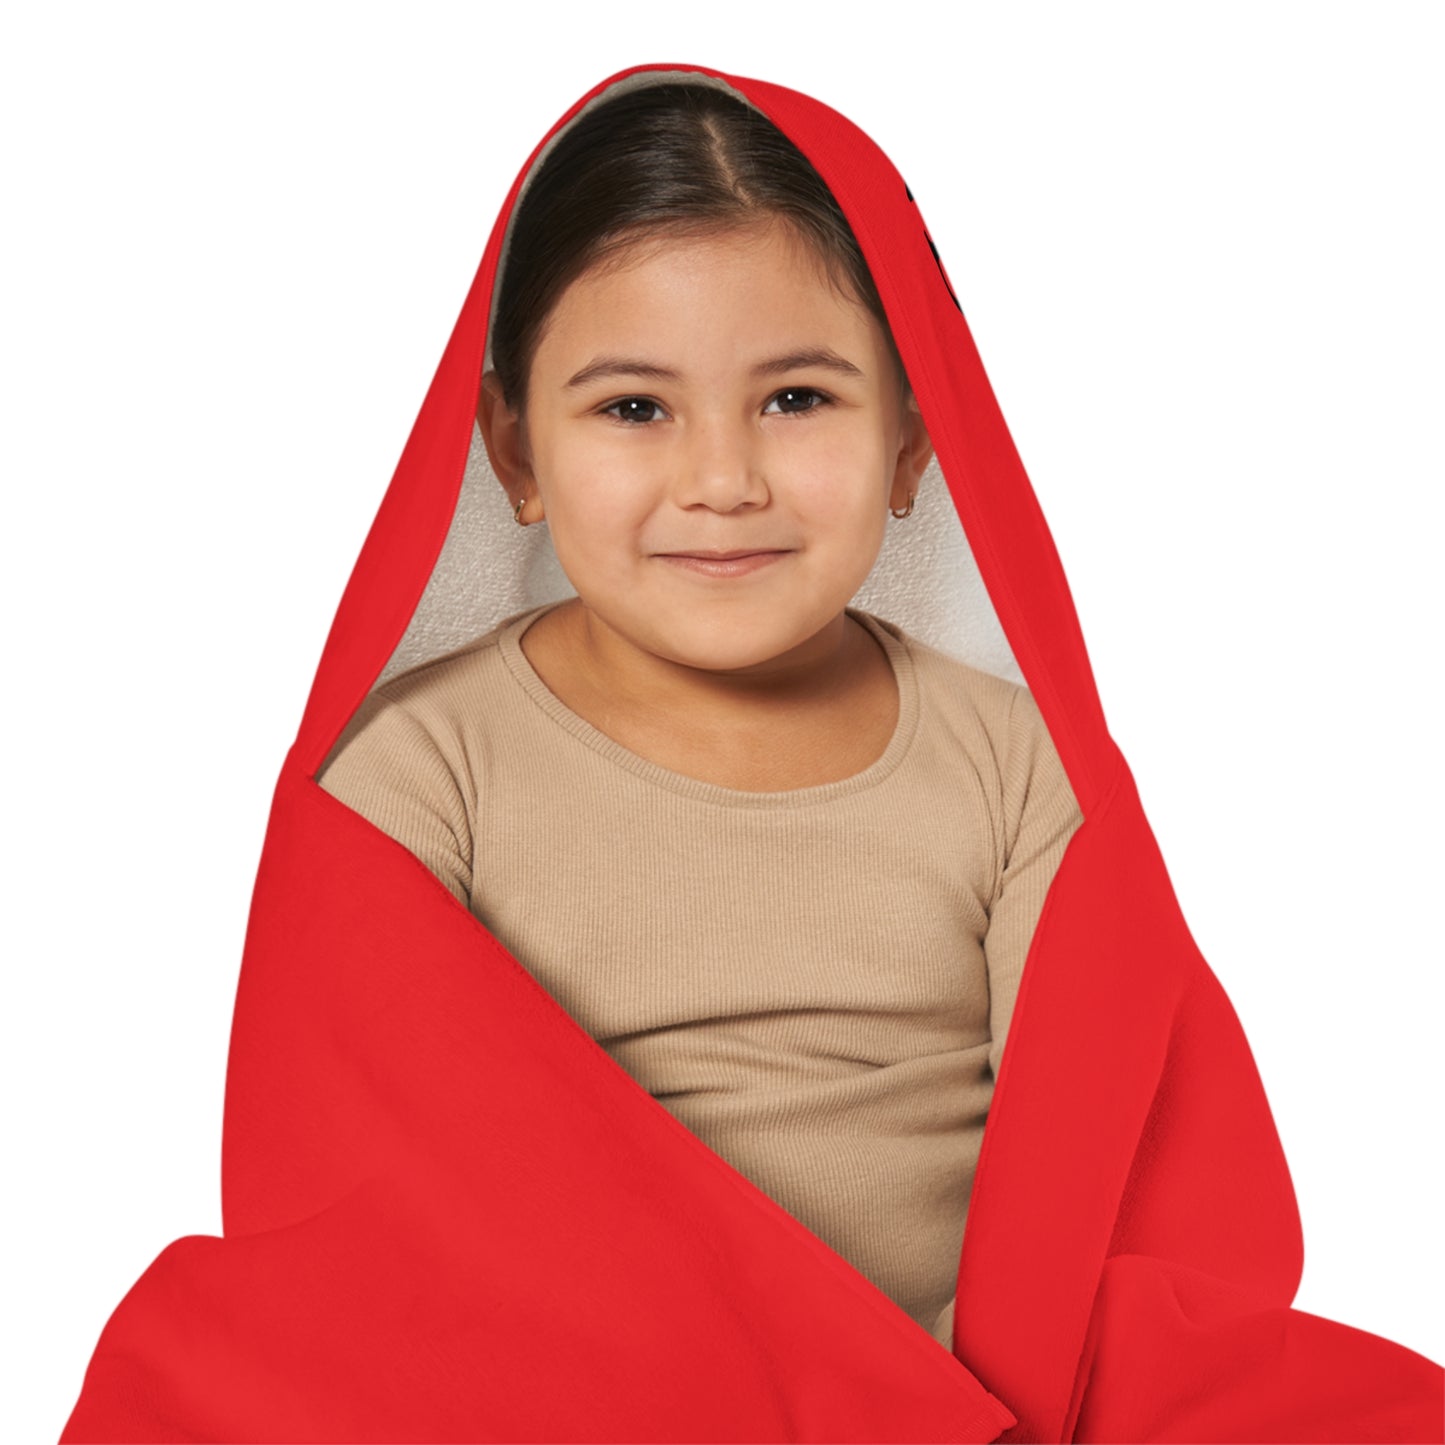 JUSKind Youth Hooded Towel